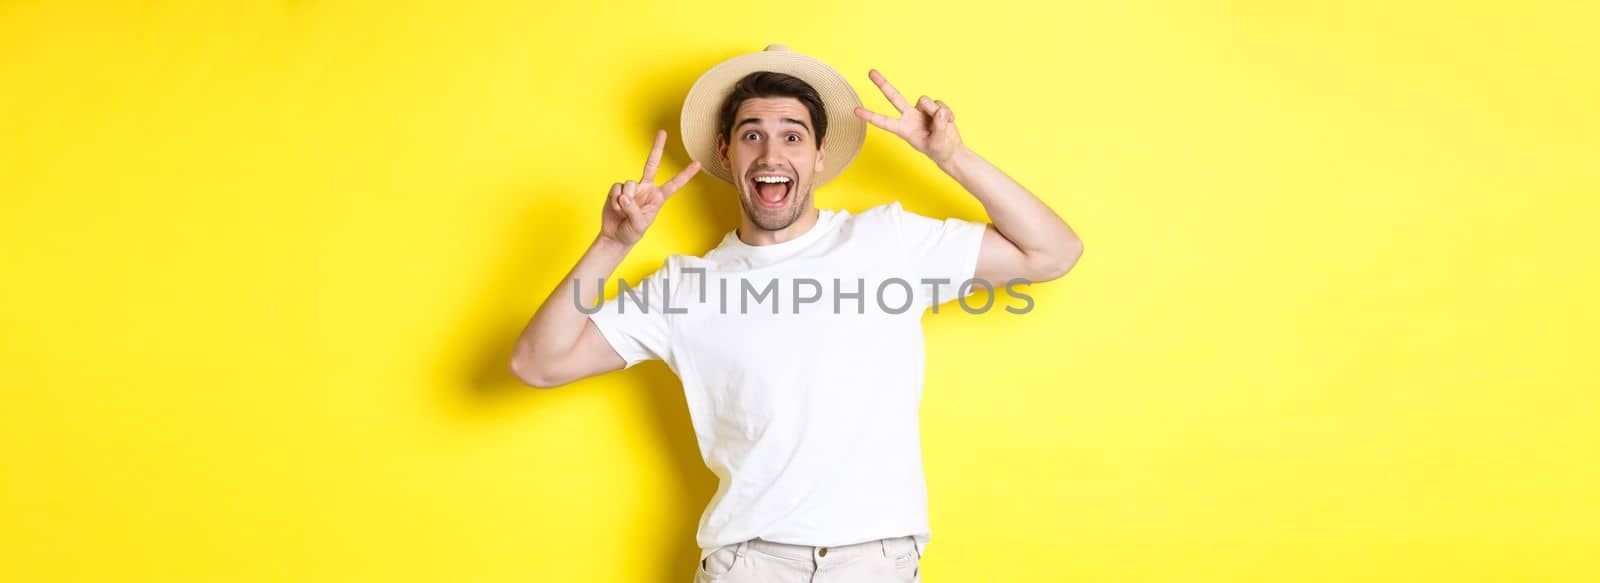 Concept of tourism and vacation. Happy male tourist posing for photo with peace signs, smiling excited, standing against yellow background.